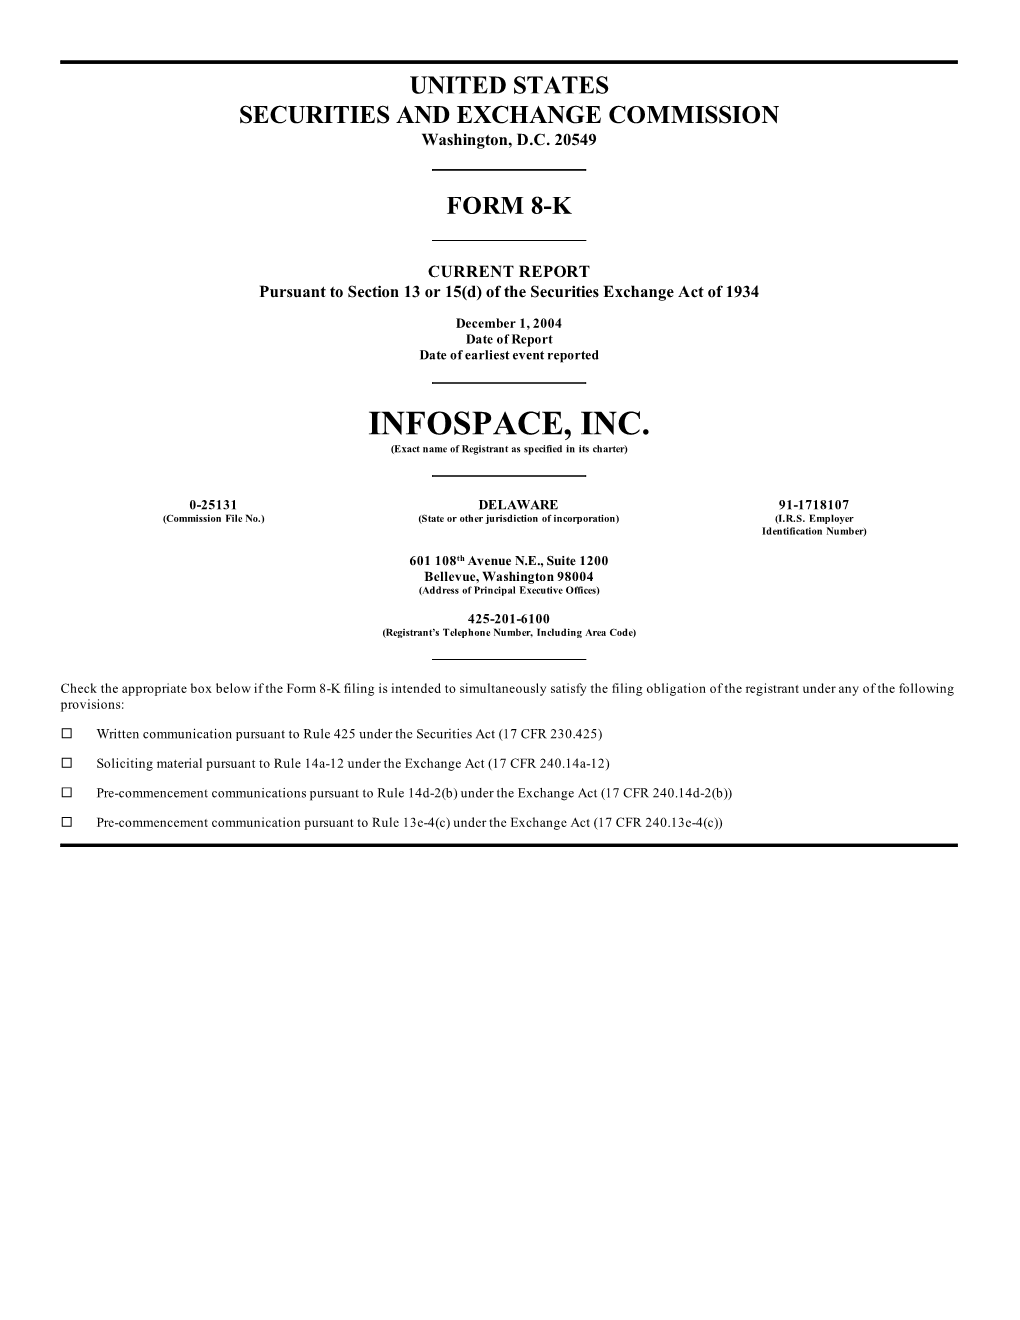 INFOSPACE, INC. (Exact Name of Registrant As Specified in Its Charter)